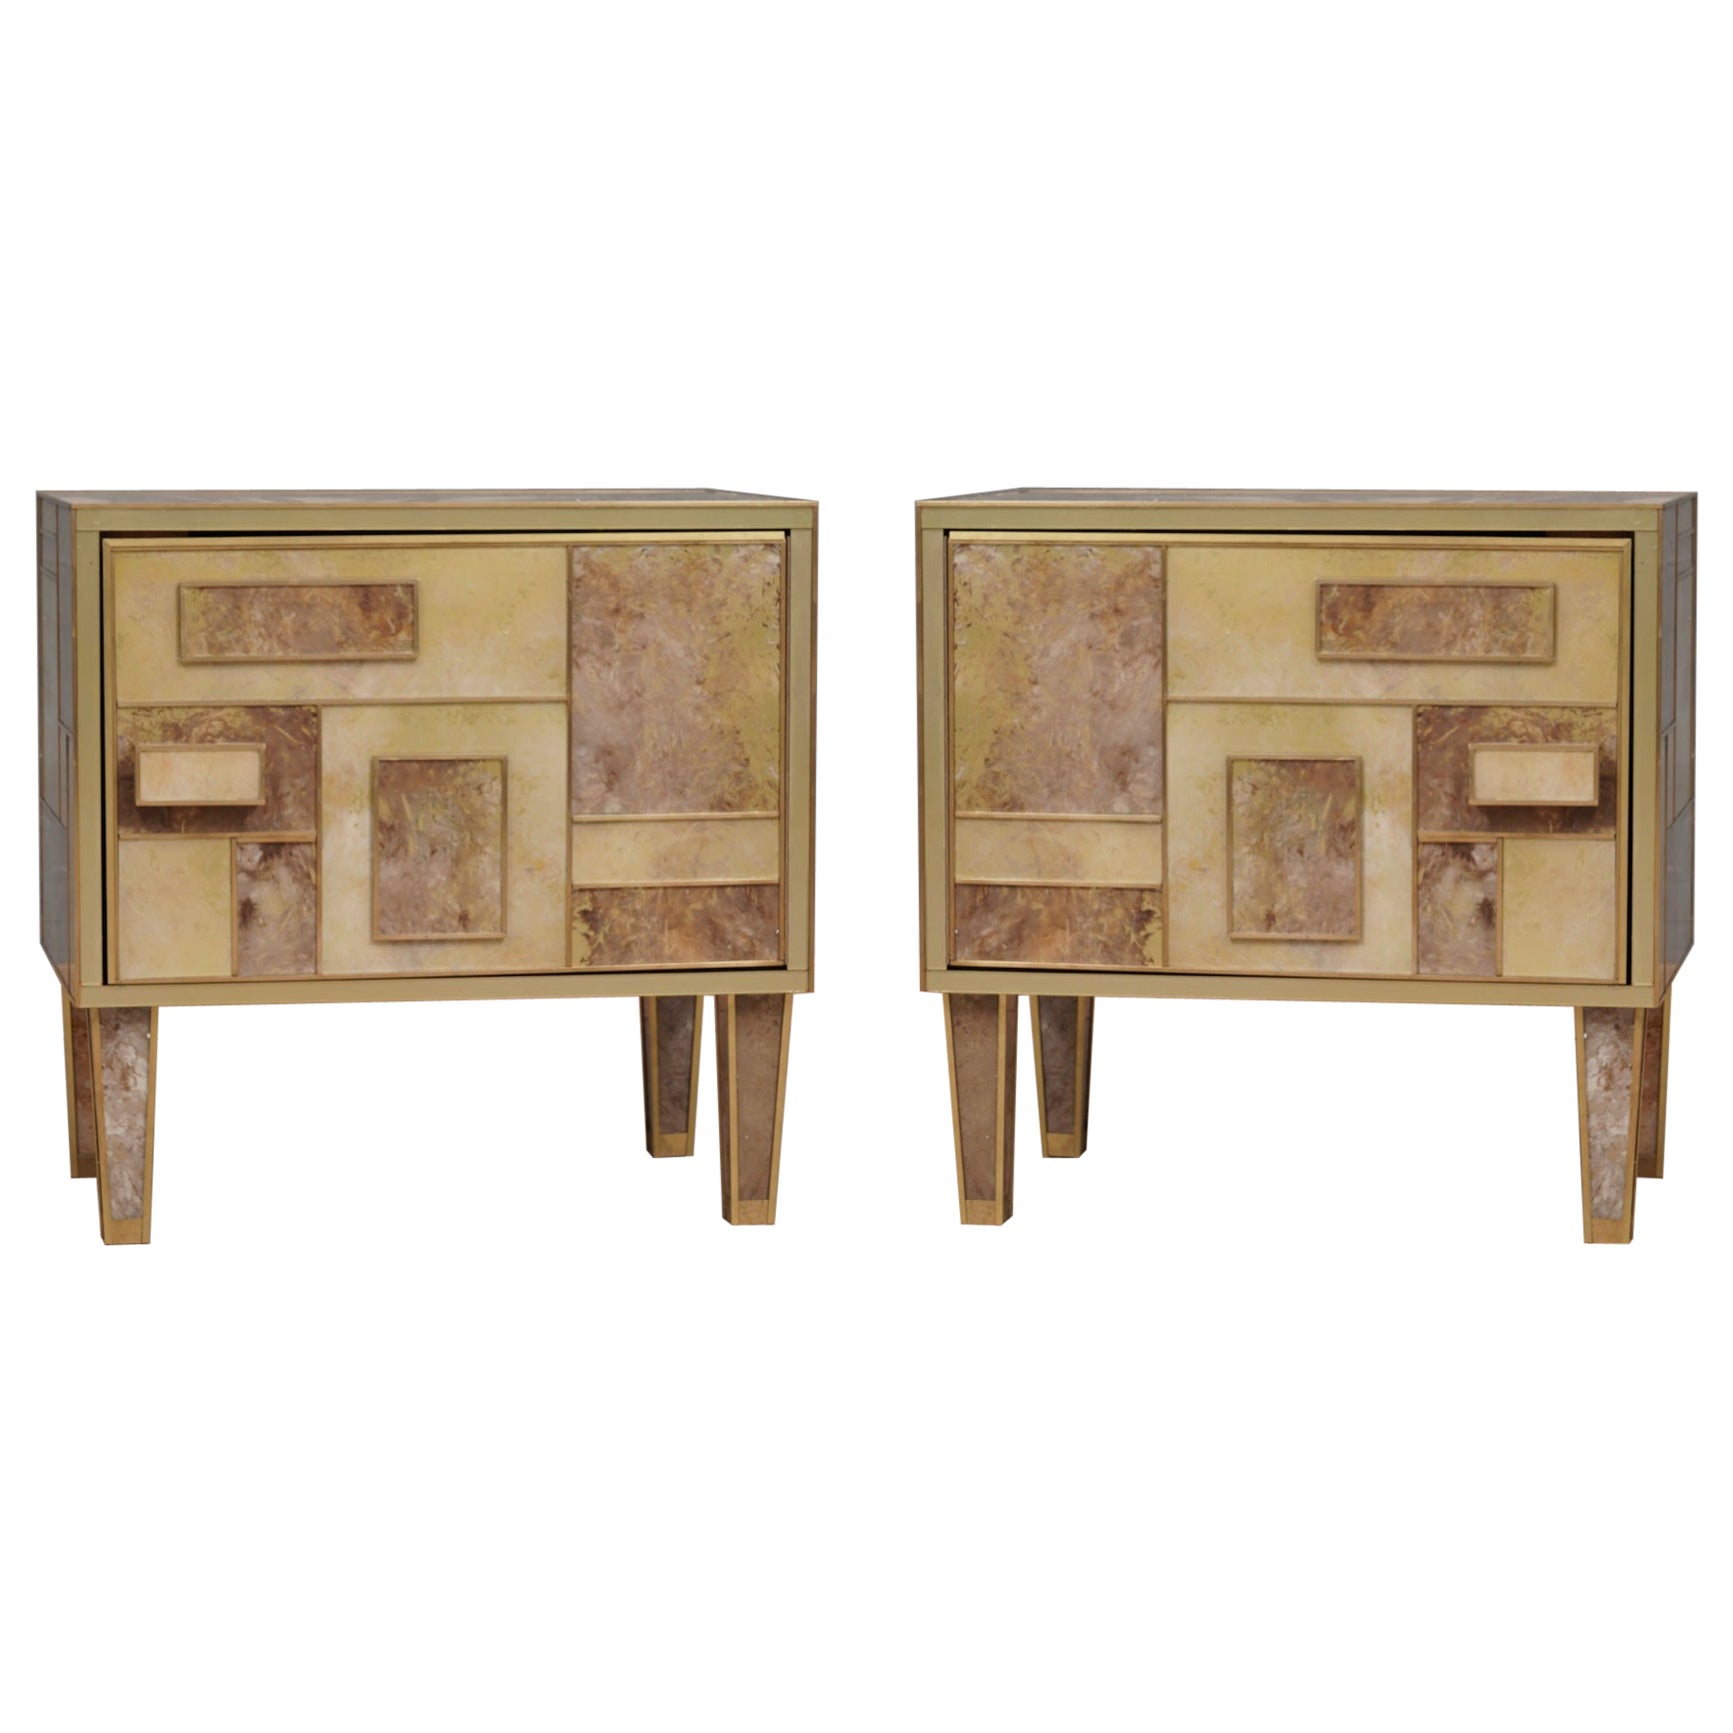 MidCentury Square brown and White Color Glass and Brass Night Stand, 2020 For Sale